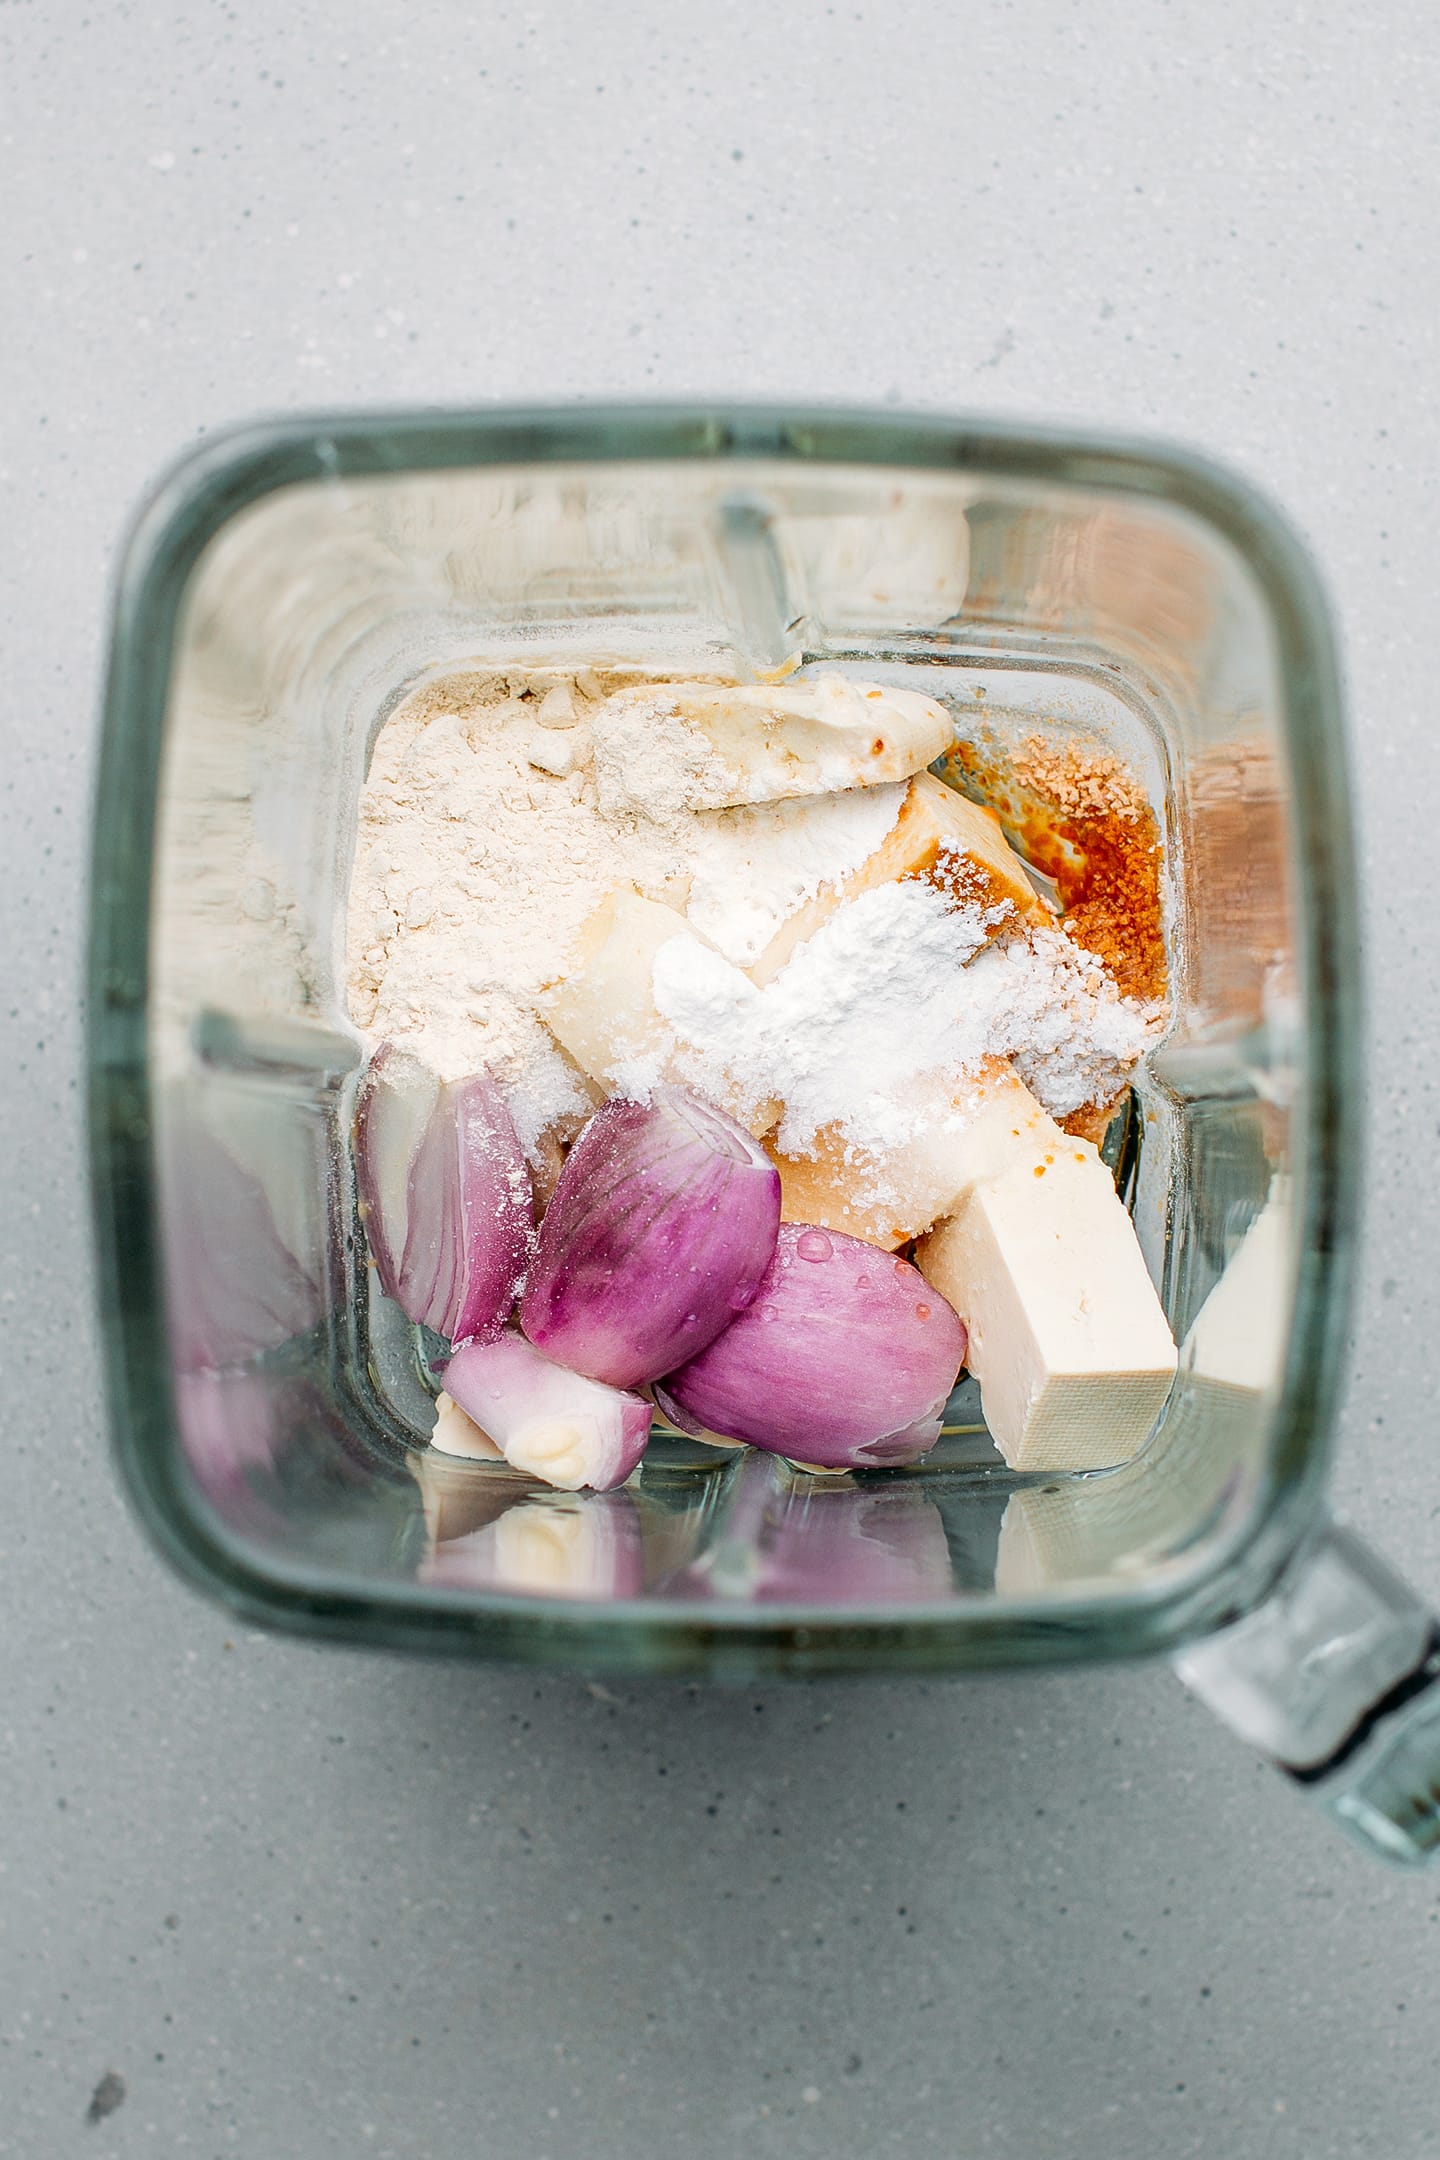 Tofu, shallots, water, and salt in a blender.